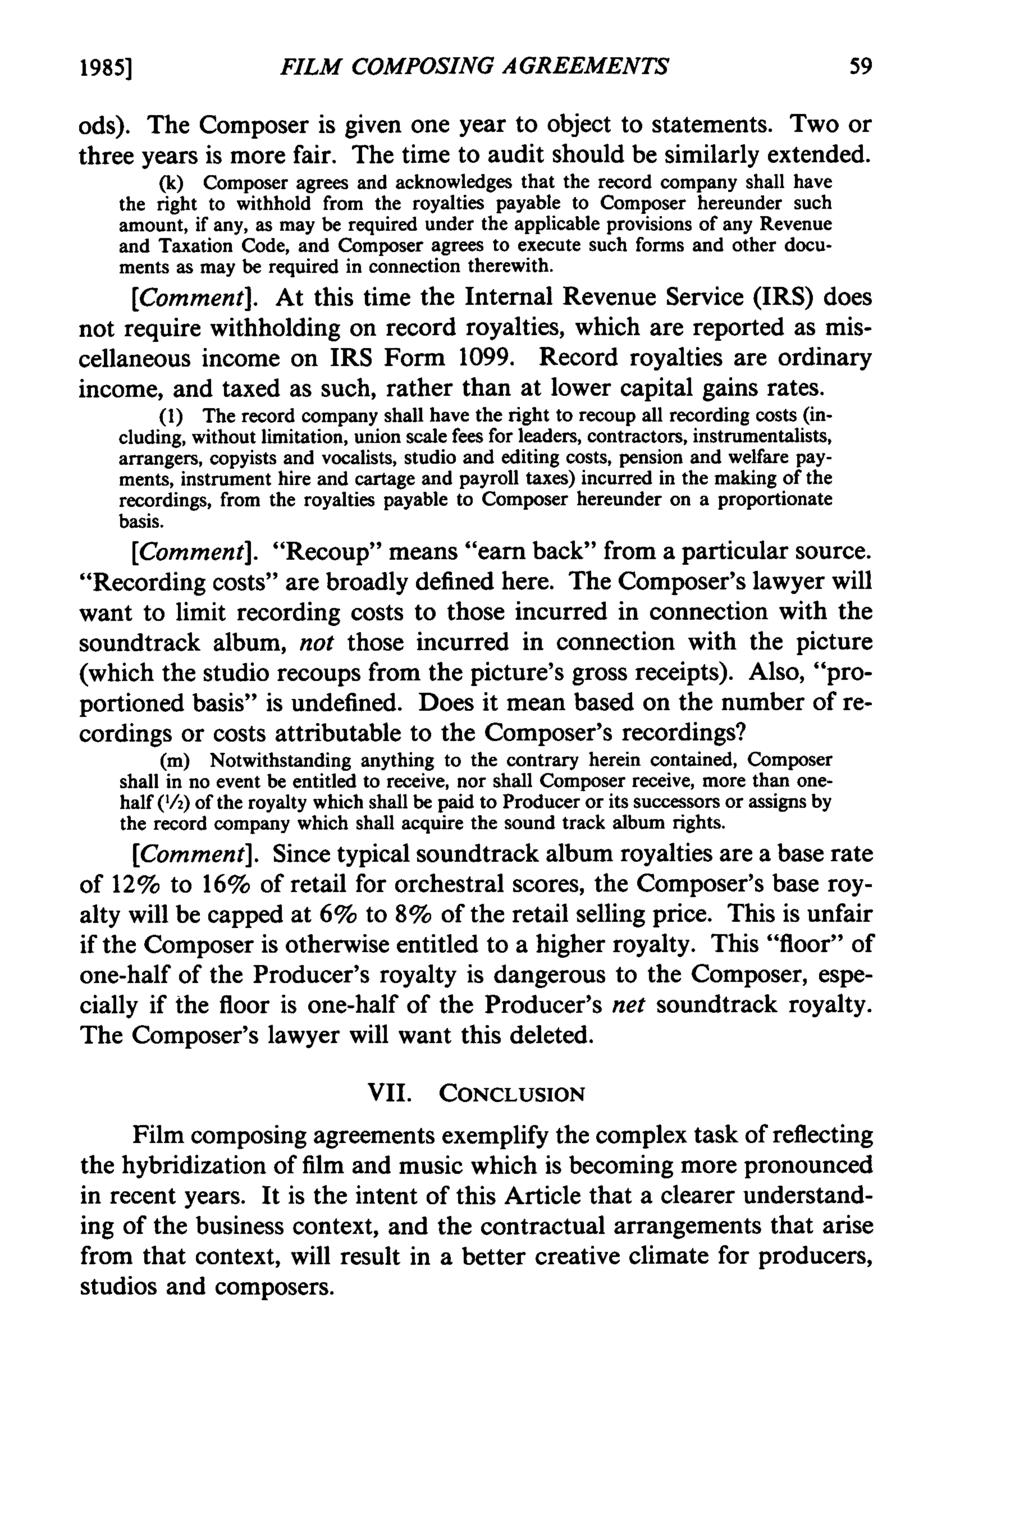 1985] FILM COMPOSING AGREEMENTS ods). The Composer is given one year to object to statements. Two or three years is more fair. The time to audit should be similarly extended.